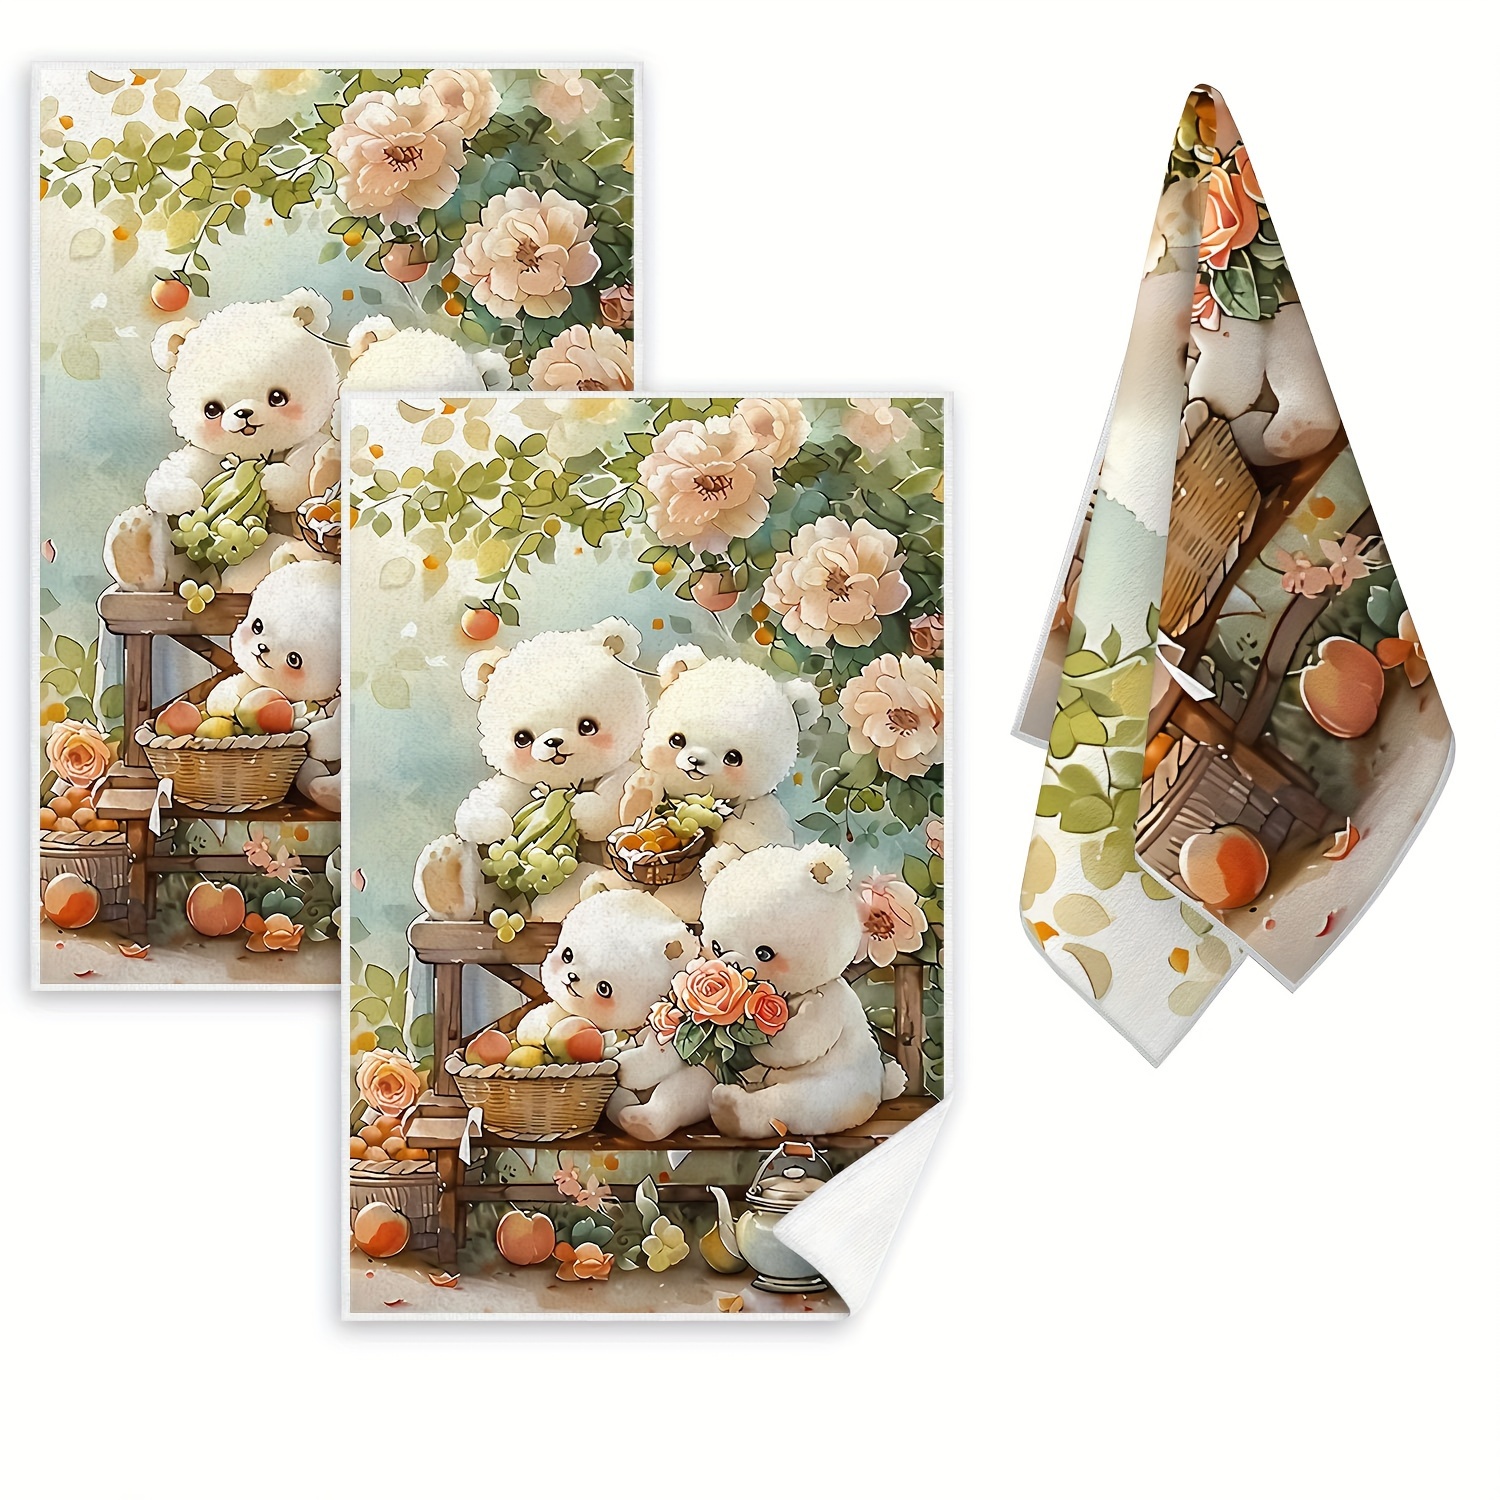 

2-piece Cute Little Bear Hand Towels - Ultra-soft Microfiber, Absorbent Kitchen & Bathroom Dish Cloths, Perfect For Cooking, Baking, Housewarming Gifts